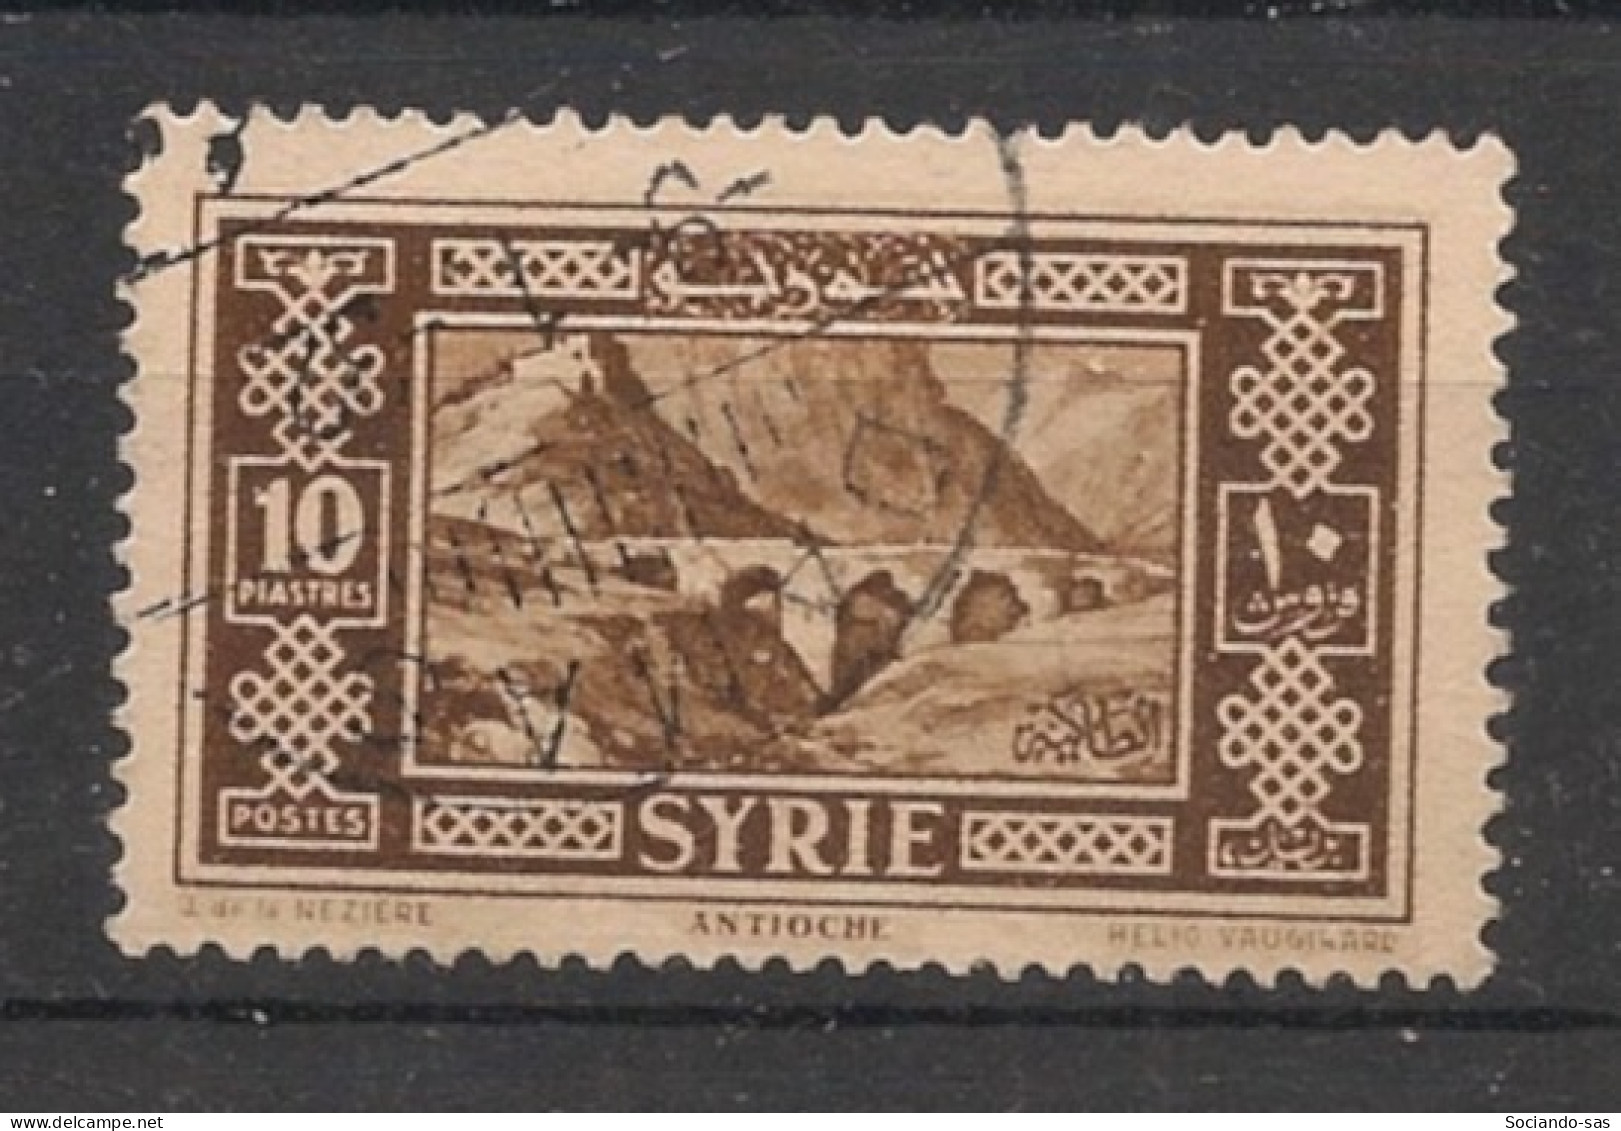 SYRIE - 1930-36 - N°YT. 212 - Antioche 10pi - Oblitéré / Used - Used Stamps